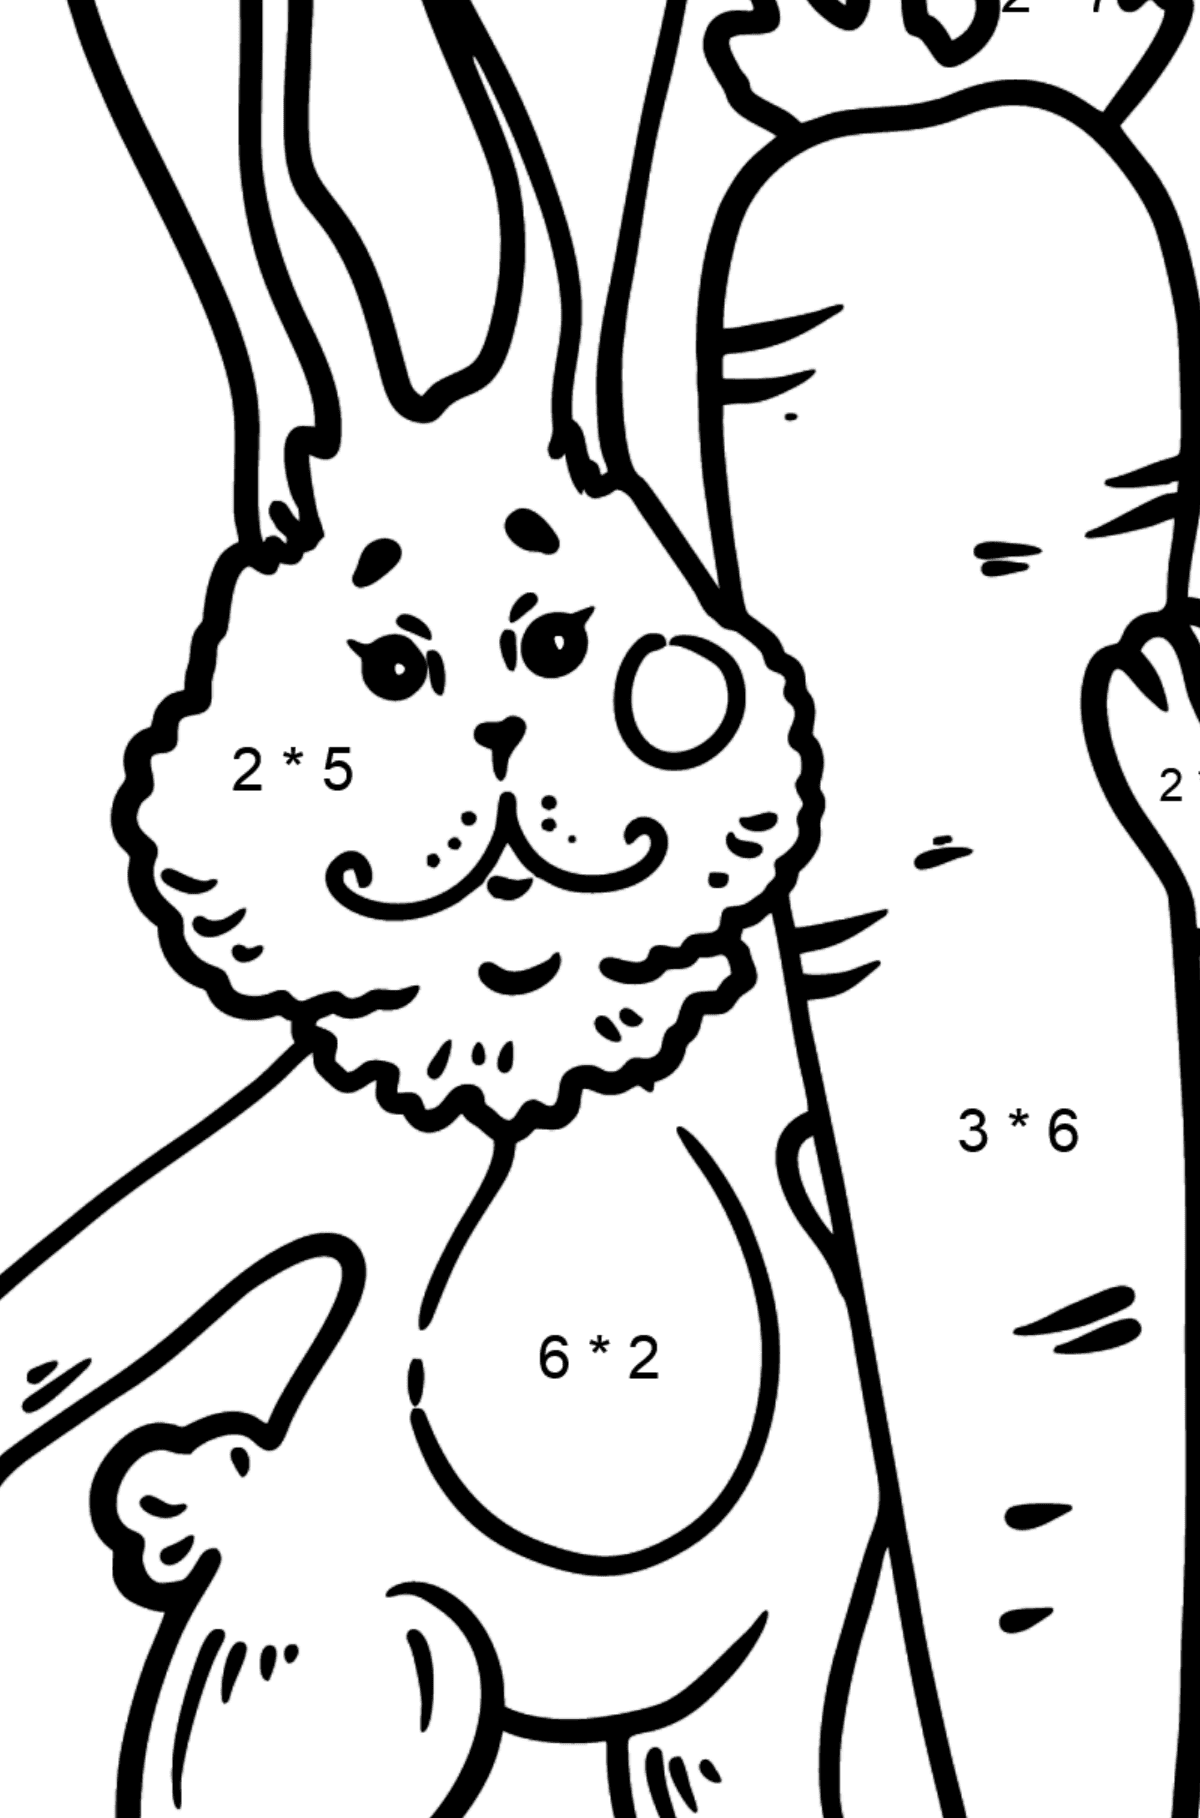 Bunny with Carrot coloring page - Math Coloring - Multiplication for Kids